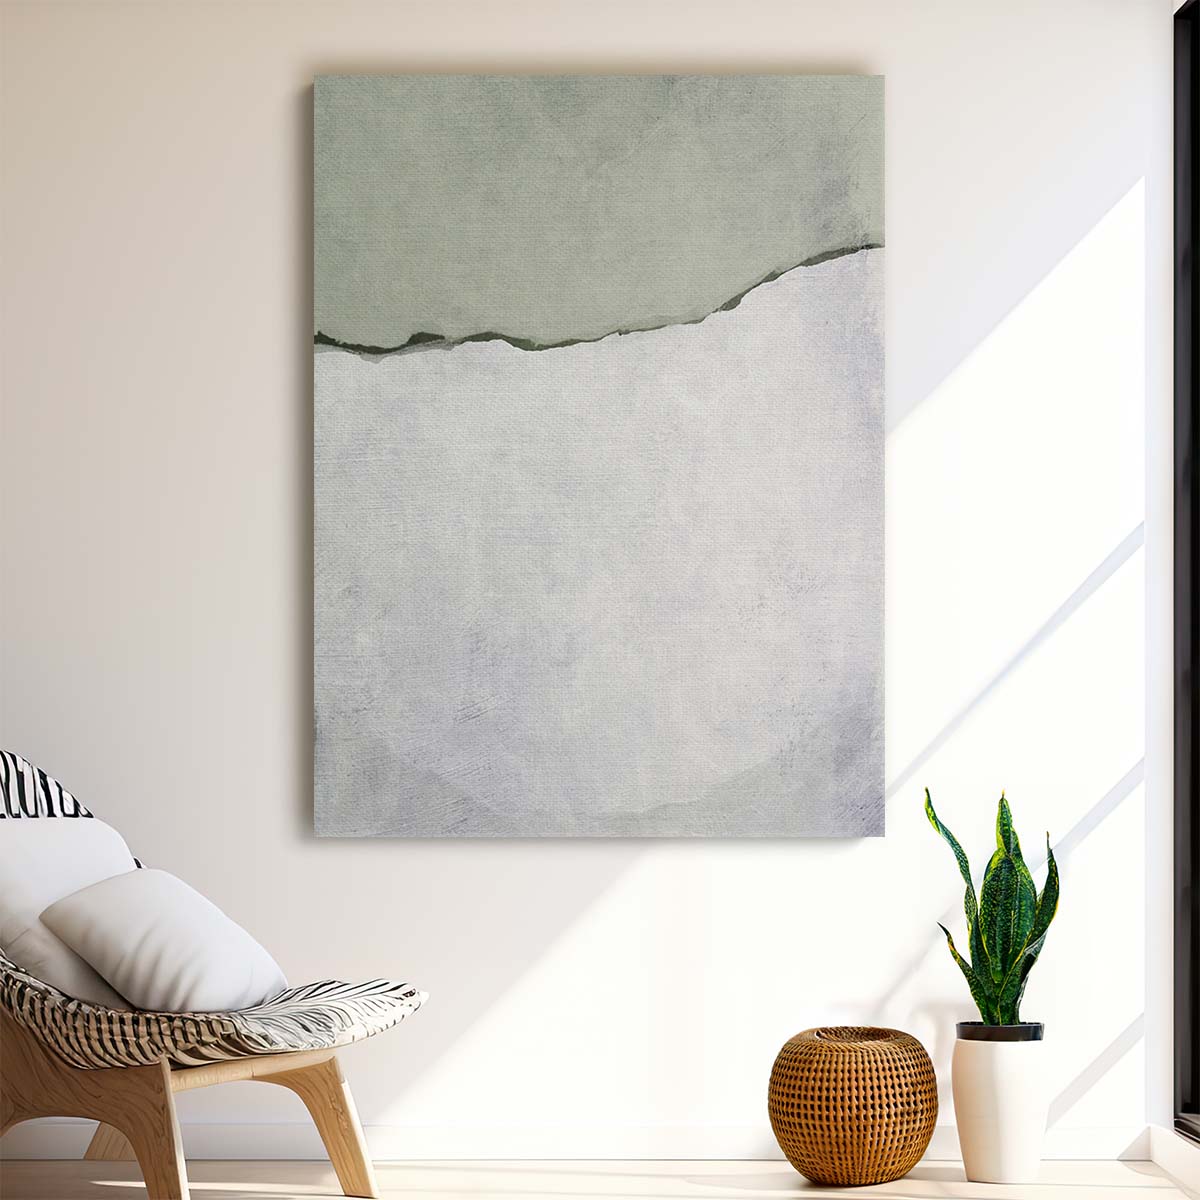 Modern Minimalistic Abstract Illustration by Dan Hobday 'Divided' by Luxuriance Designs, made in USA